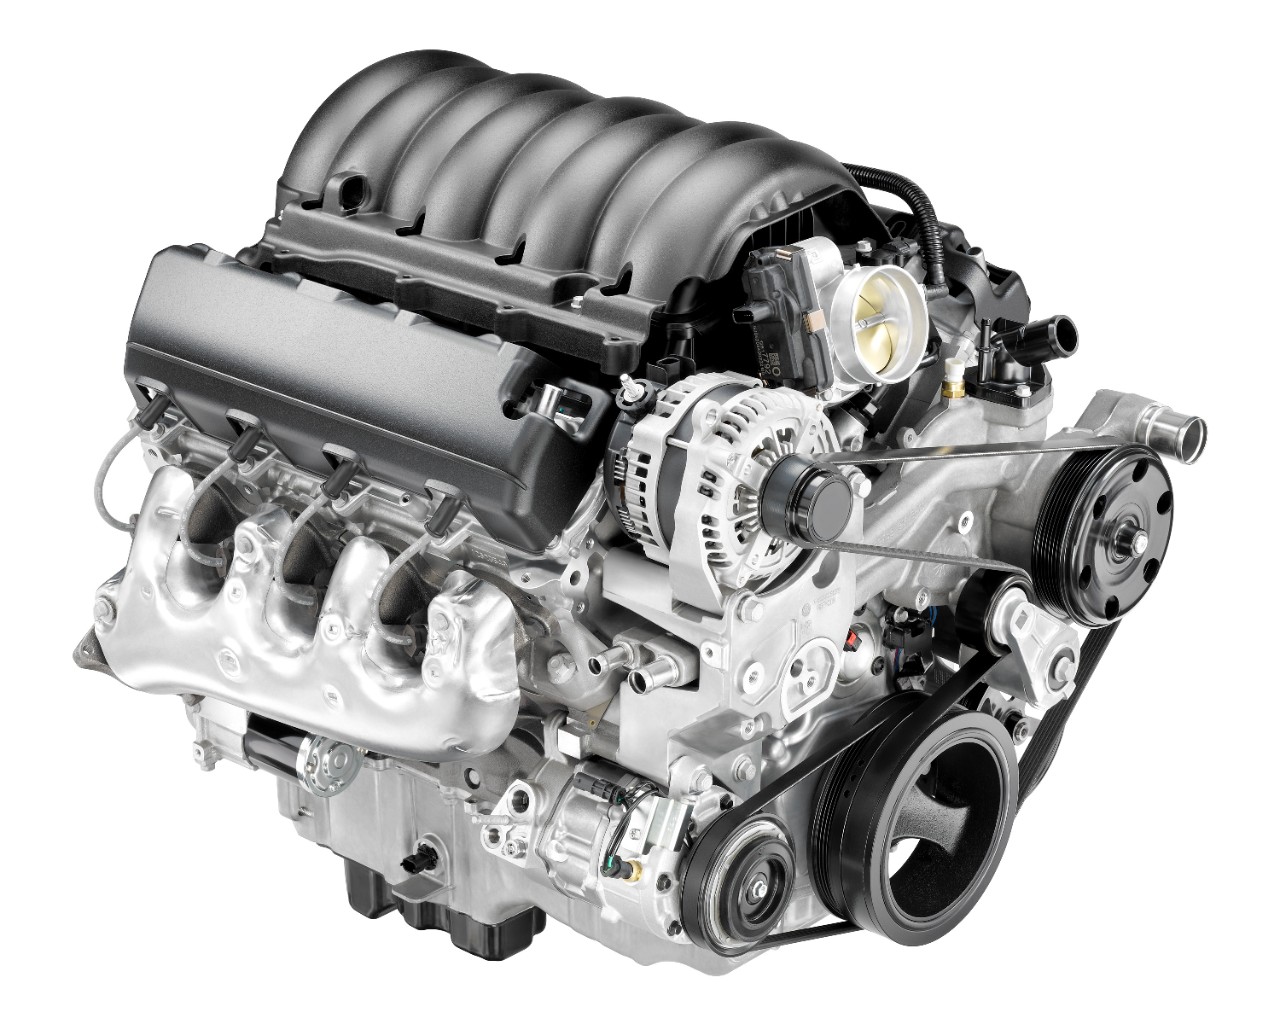 HQ Chevrolet Engine Wallpapers | File 246.72Kb